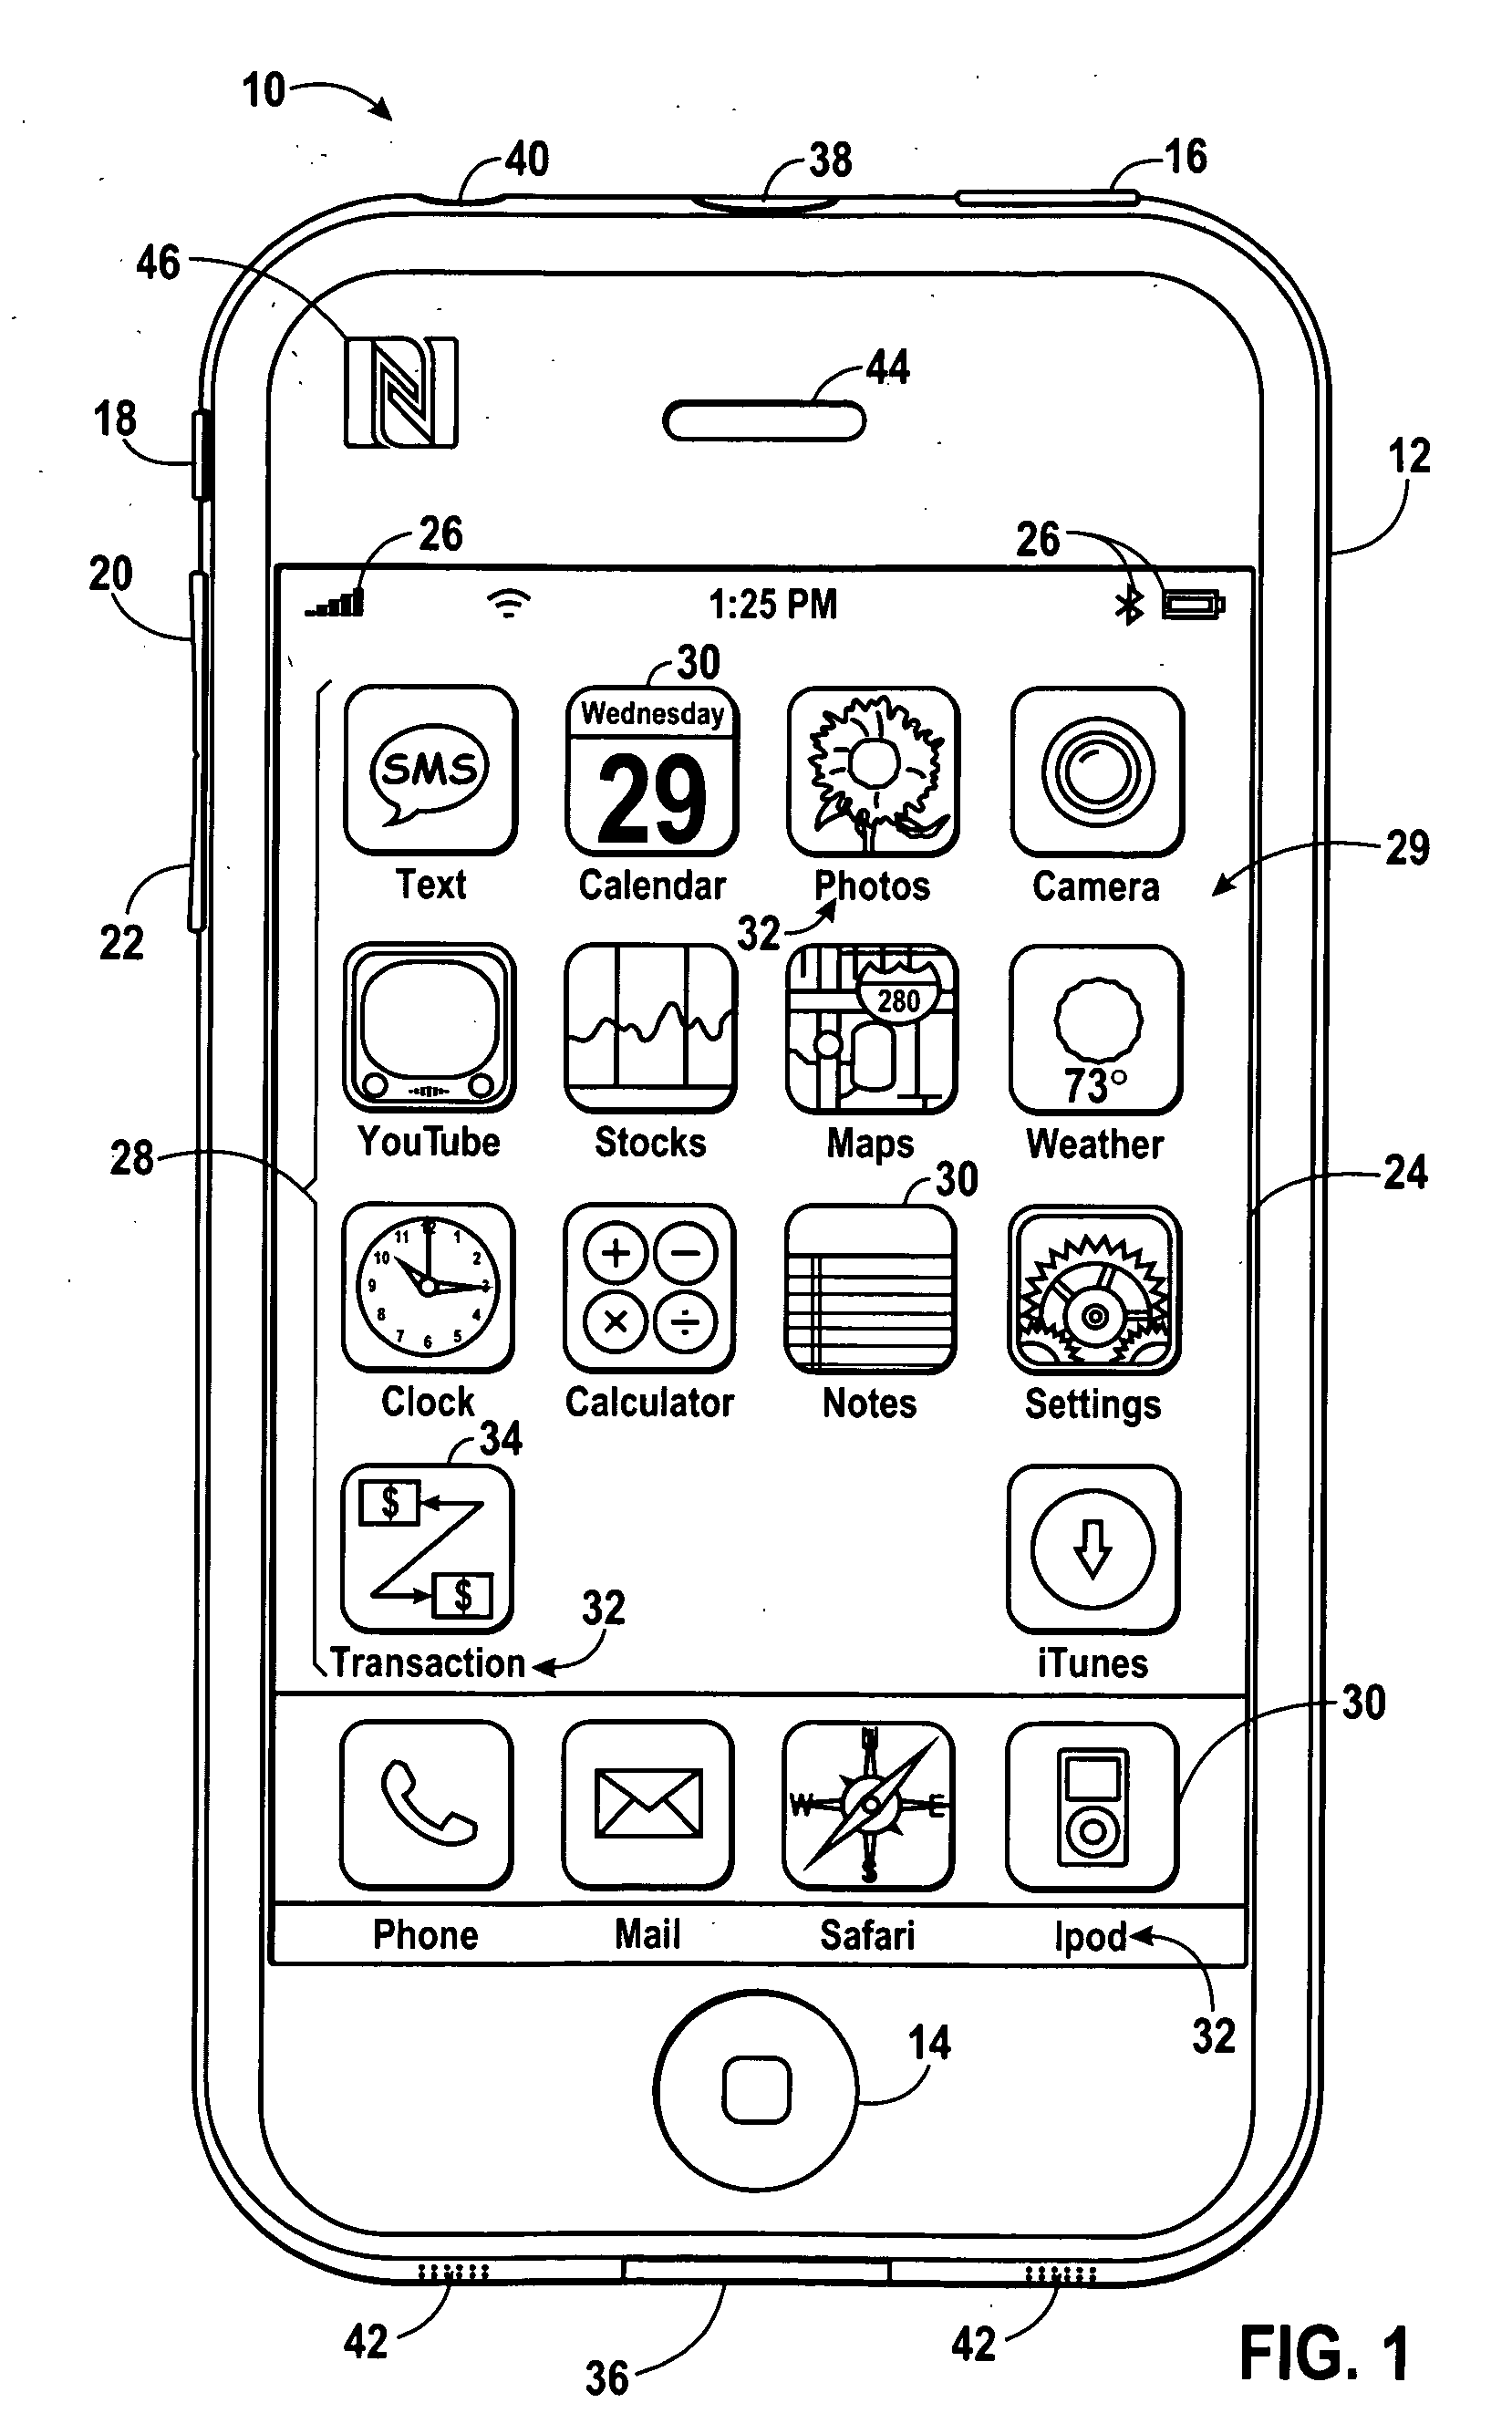 System and method for processing peer-to-peer financial transactions